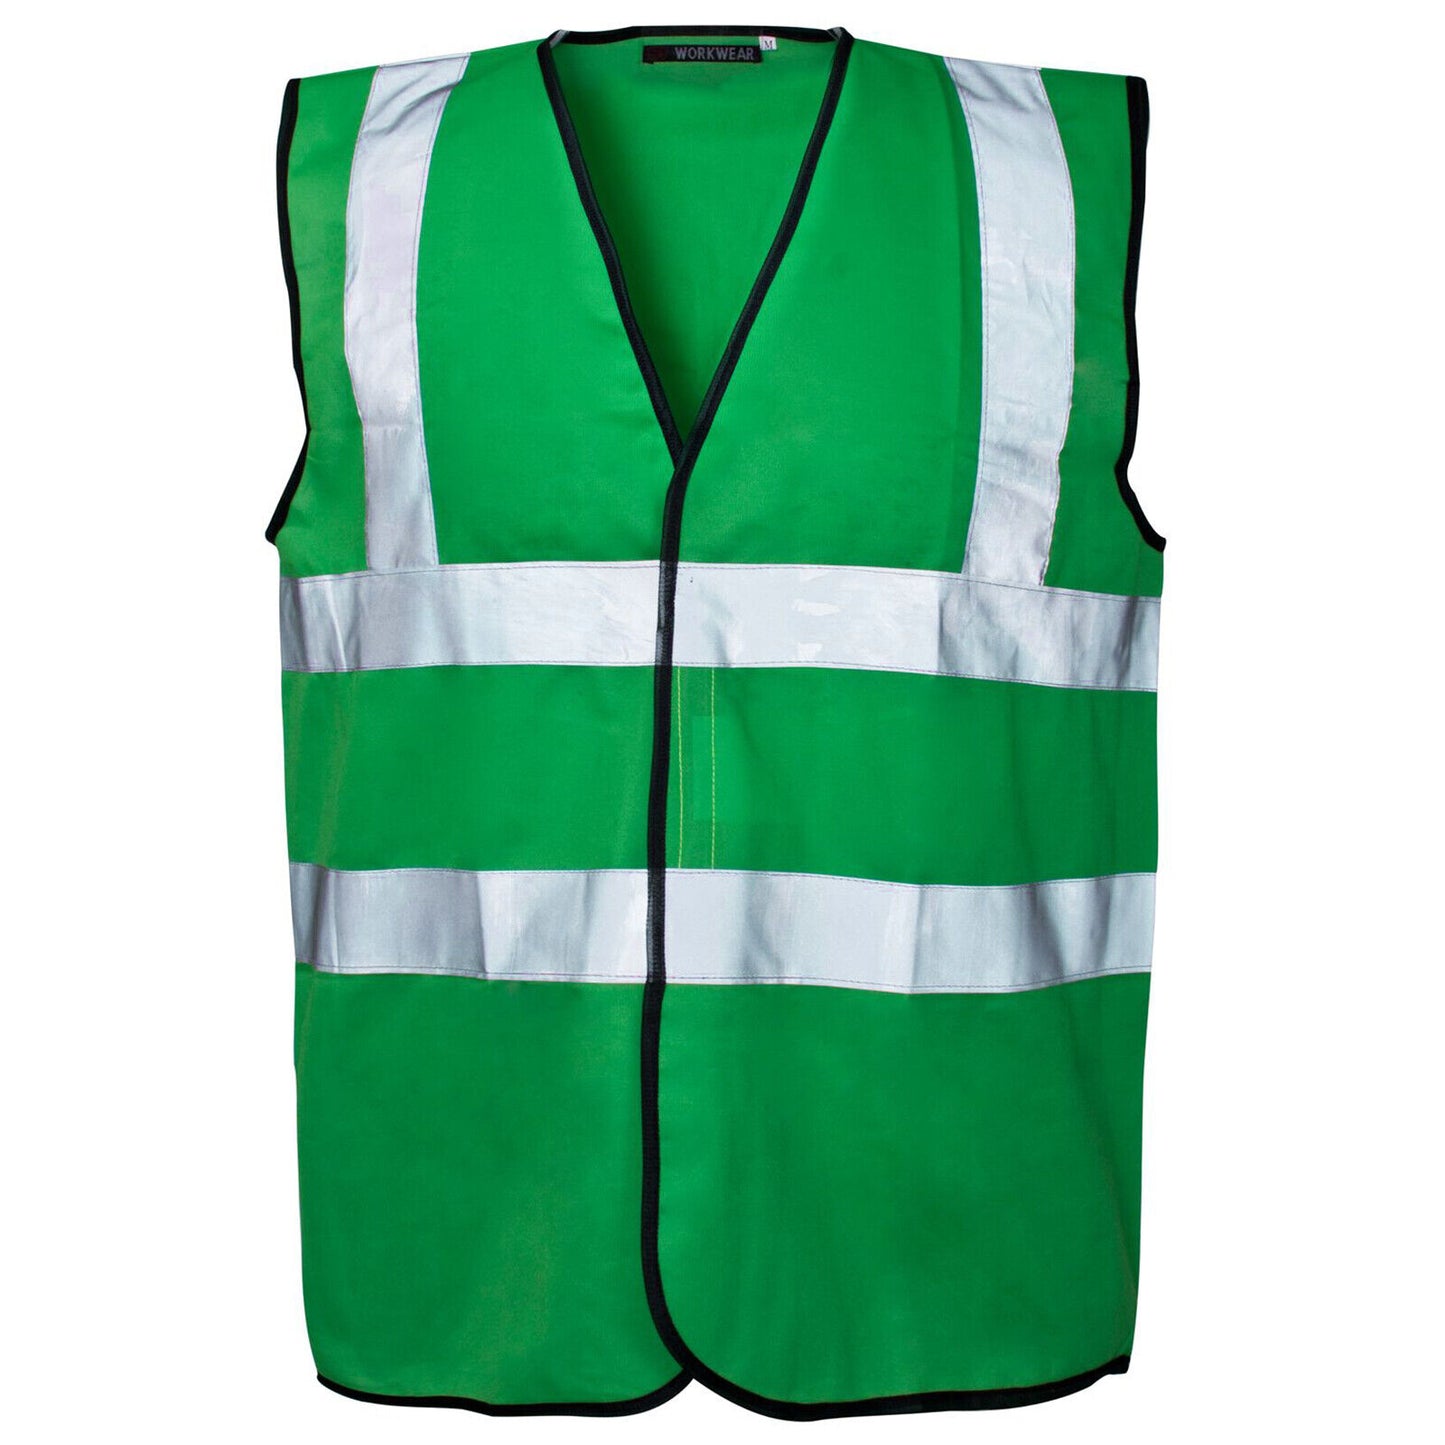 2 PACK HI VIS VEST VISIBILITY SECURITY WORK CONTRACTOR SAFETY WAISTCOAT JACKET